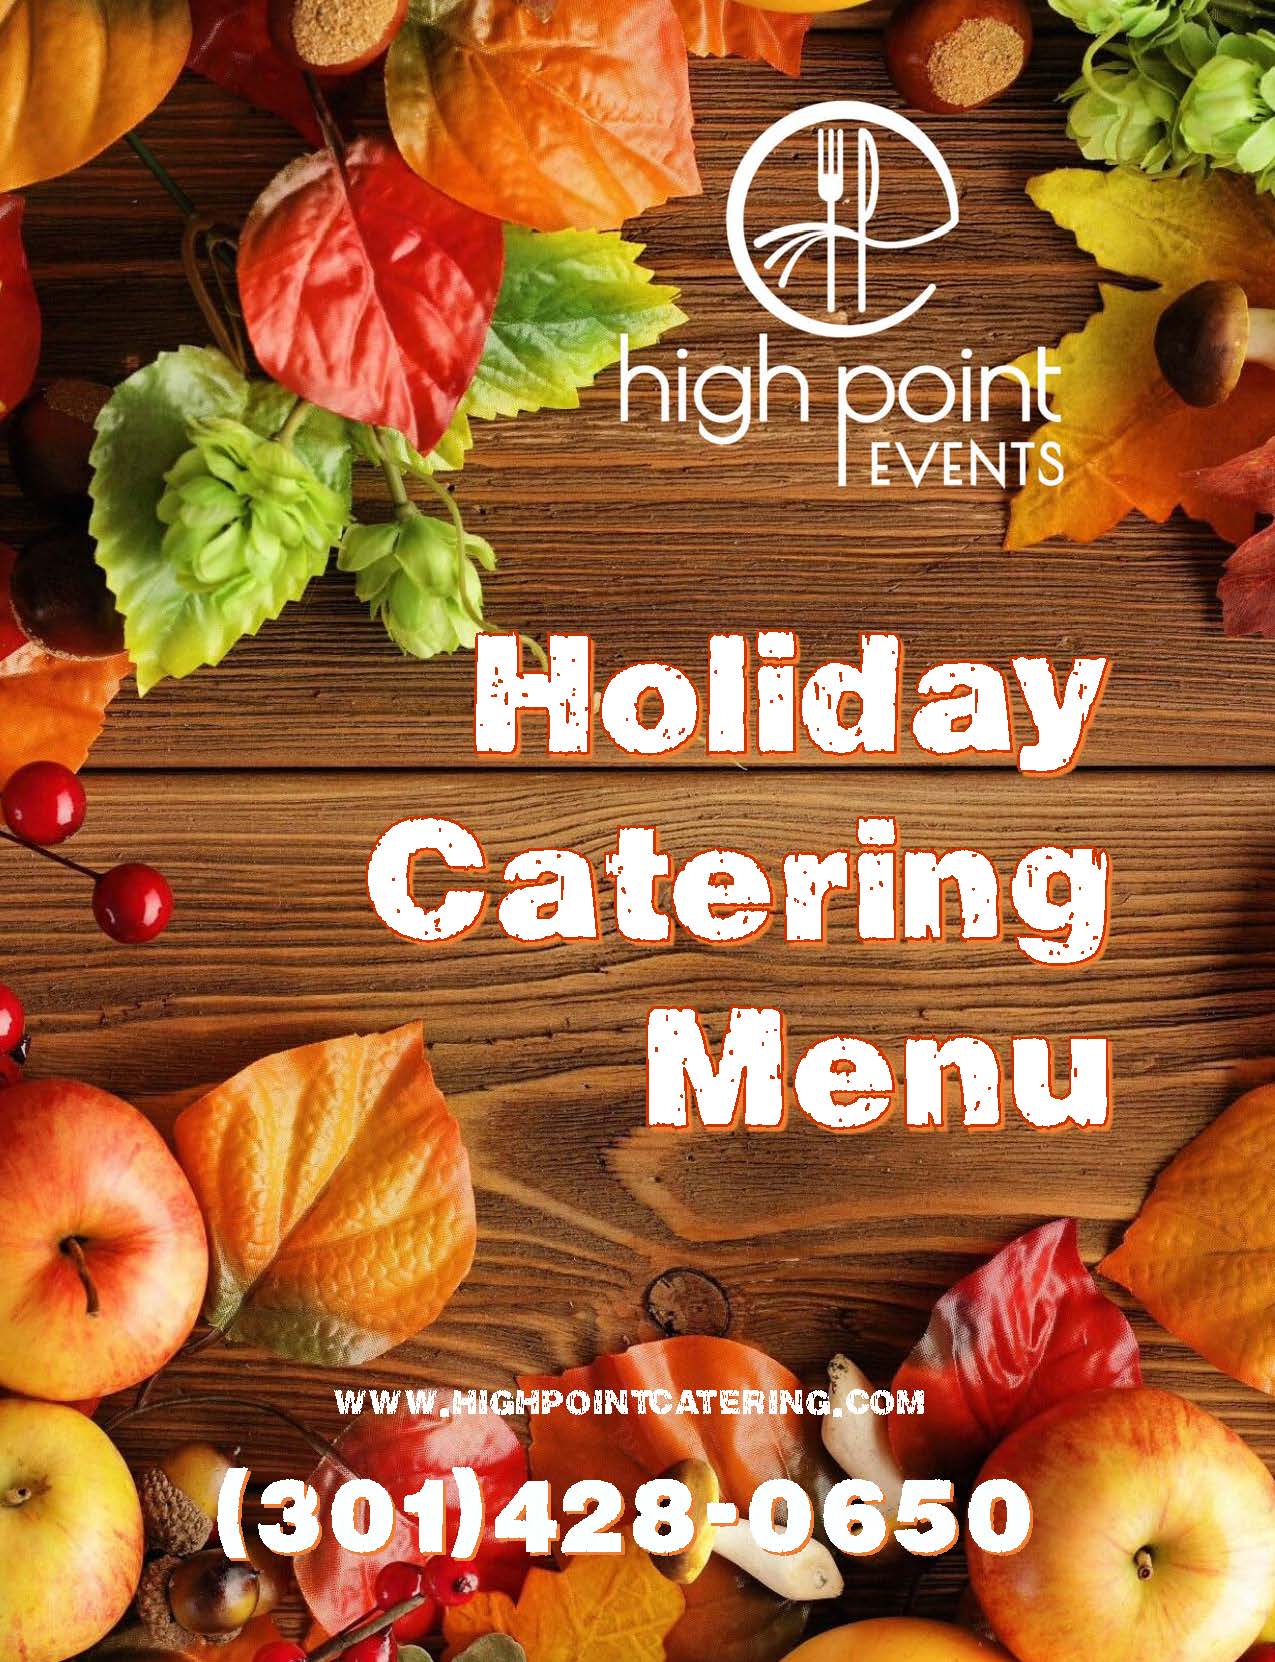 Menus High Point Events & Catering